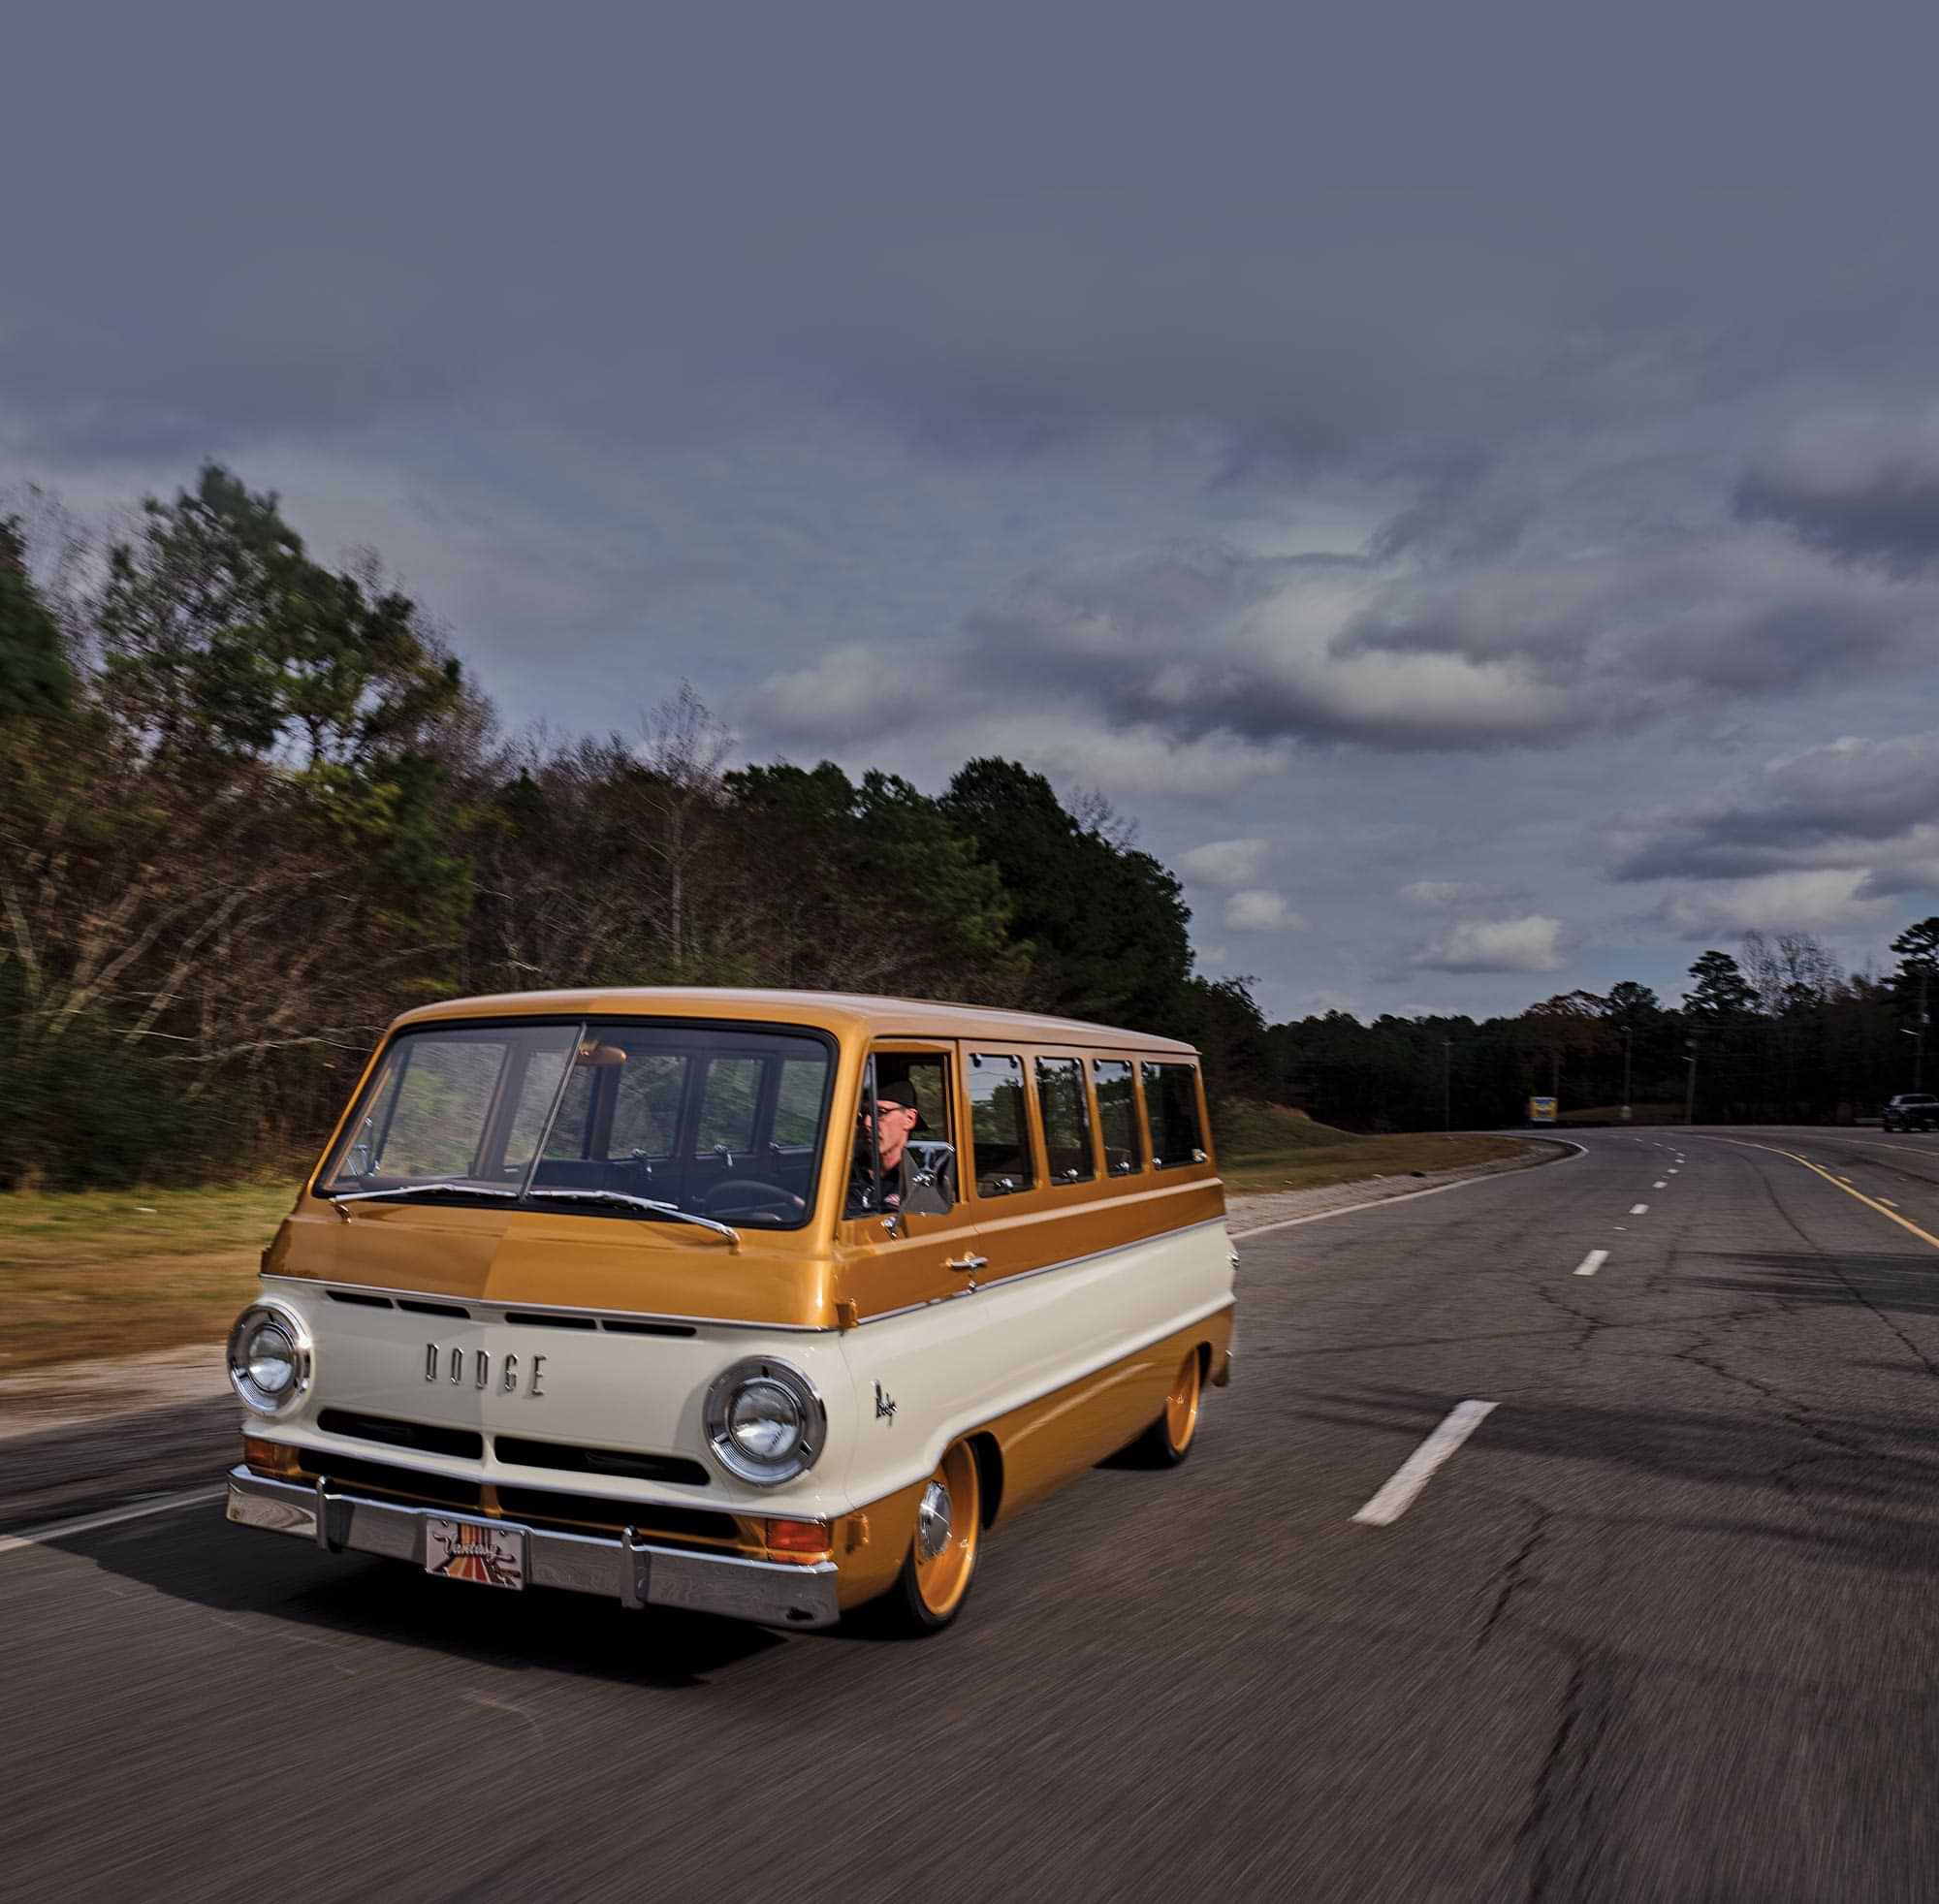 a man drives the vintage '69 Dodge A108 down a road on a cloudy day